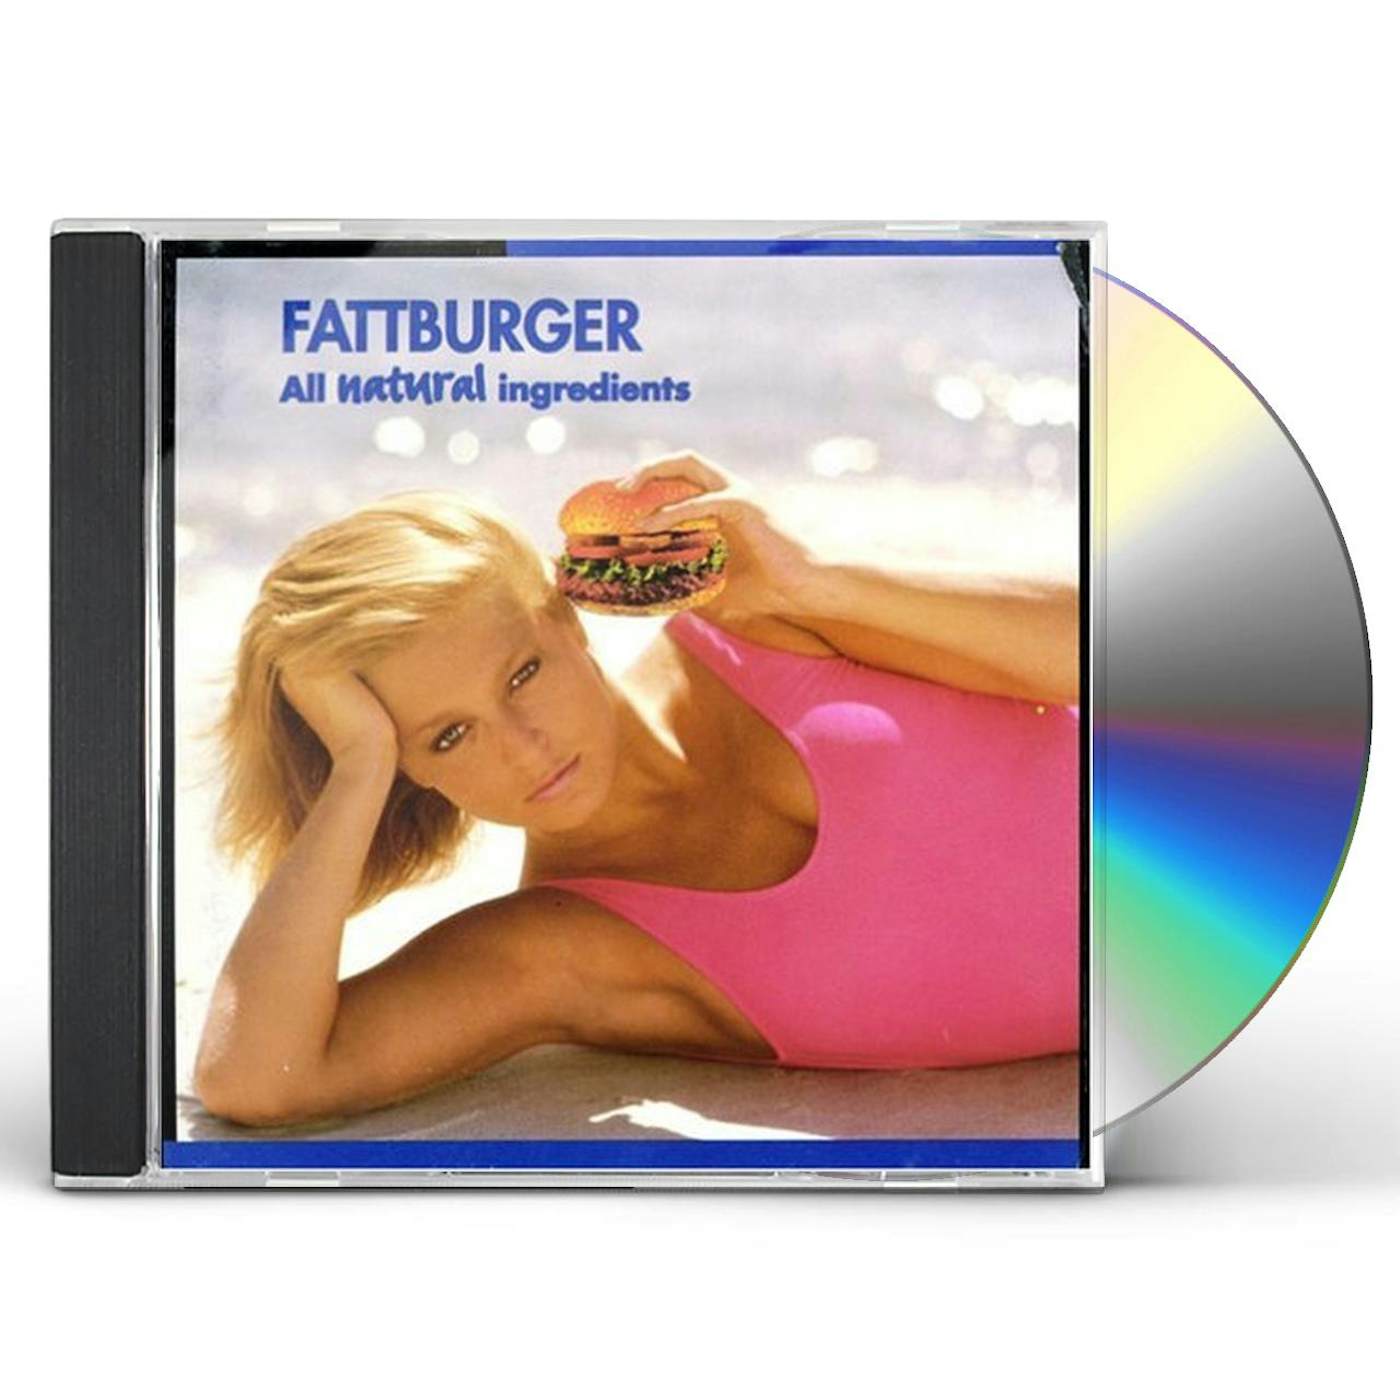 Fattburger ALL NATURAL INGREDIENTS CD